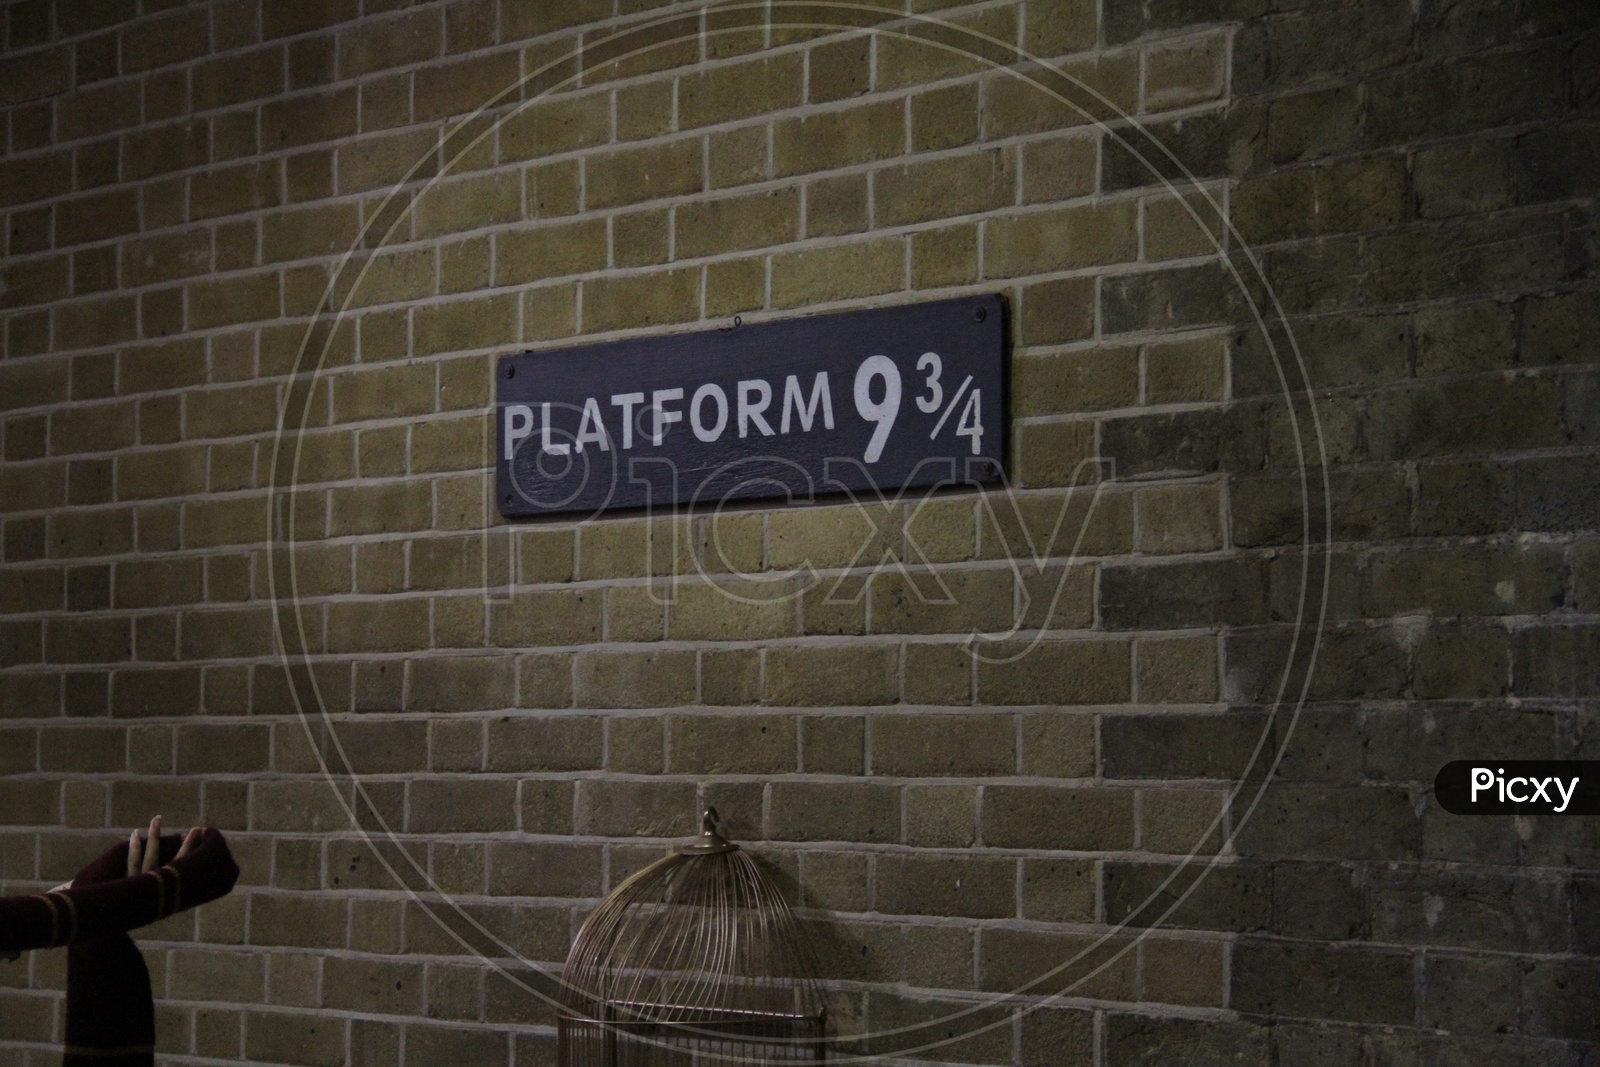 Platform 9 3/4 Sign from Harry Potter movie in King's Cross Station